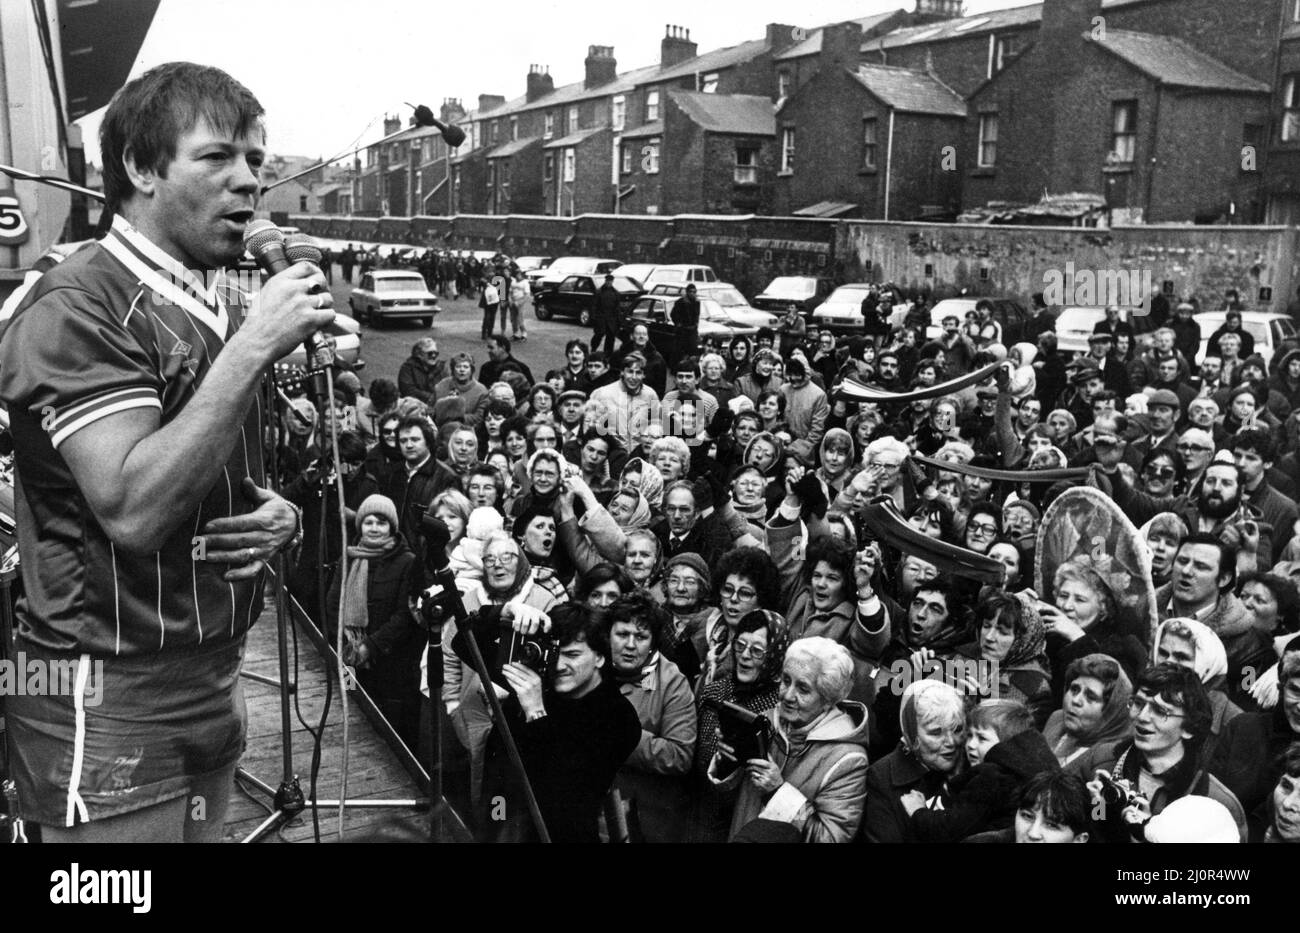 Radio star Billy Butler entertains a crowd of 300 fans at Anfield with a version of Top anthem 'You'll Never Walk Alone'. Clad in a Liverpool FC strip, red-hot Evertonian Billy faced the ordeal after loosing a bet with his audience on Radio Merseyside. 18th February 1983. Stock Photo